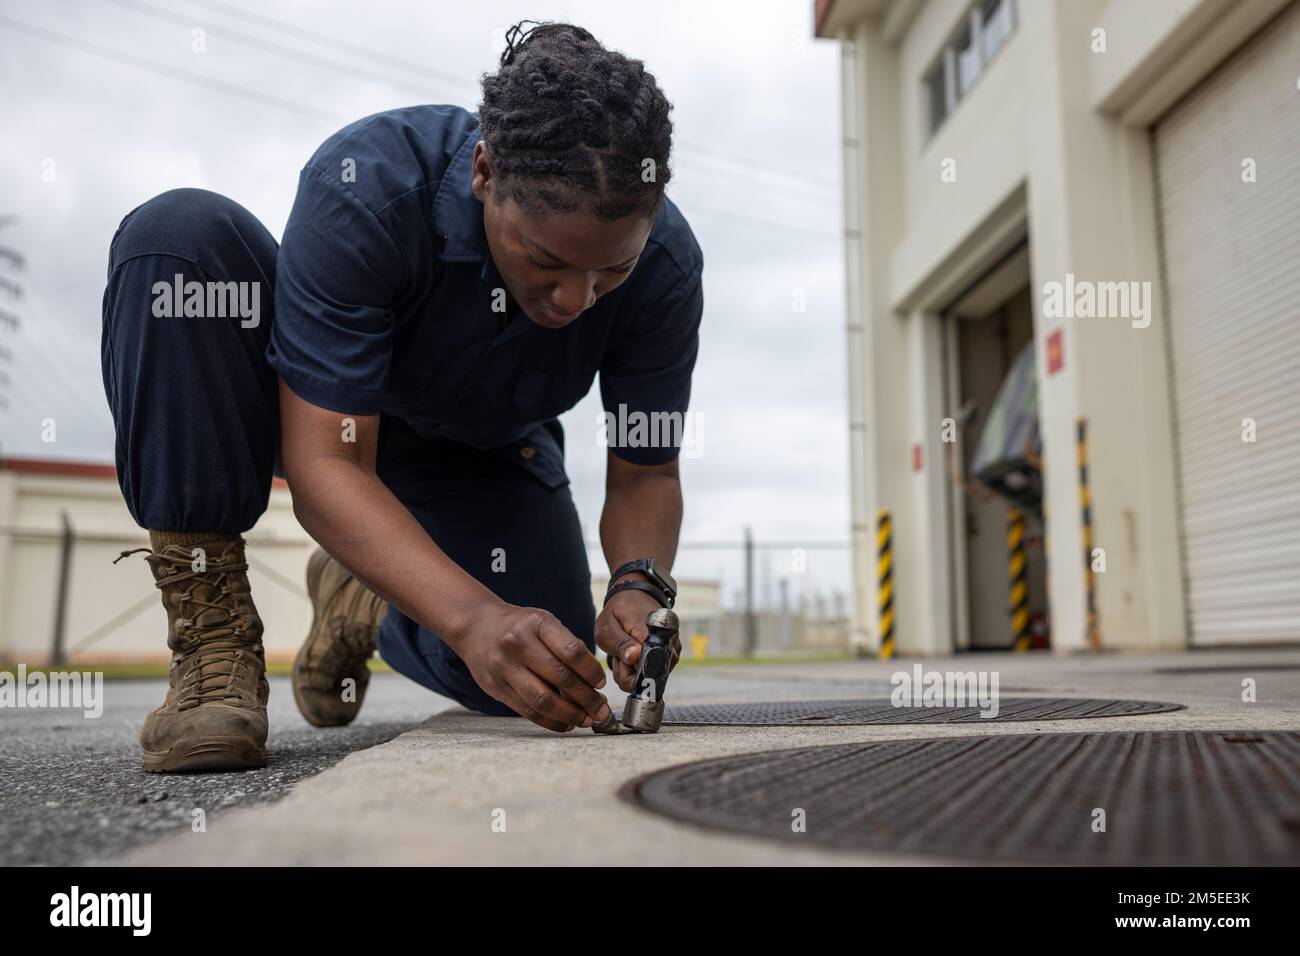 U.S. Marine Corps Cpl. Crystal Davis, an automotive maintenance technician with 3d Landing Support Battalion, Combat Logistics Regiment 3, 3d Marine Logistics Group, flattens a piece of metal with a hammer to repair a 7-ton truck starter on Camp Foster, Okinawa, Japan, Mar. 7, 2022. Davis, a Spanishtown, Jamaica native, joined the Marine Corps in 2019. Now at the rank of Corporal, she continues to be a diligent leader by striving to mirror her mother's guidance and wisdom towards her Marines. Stock Photo